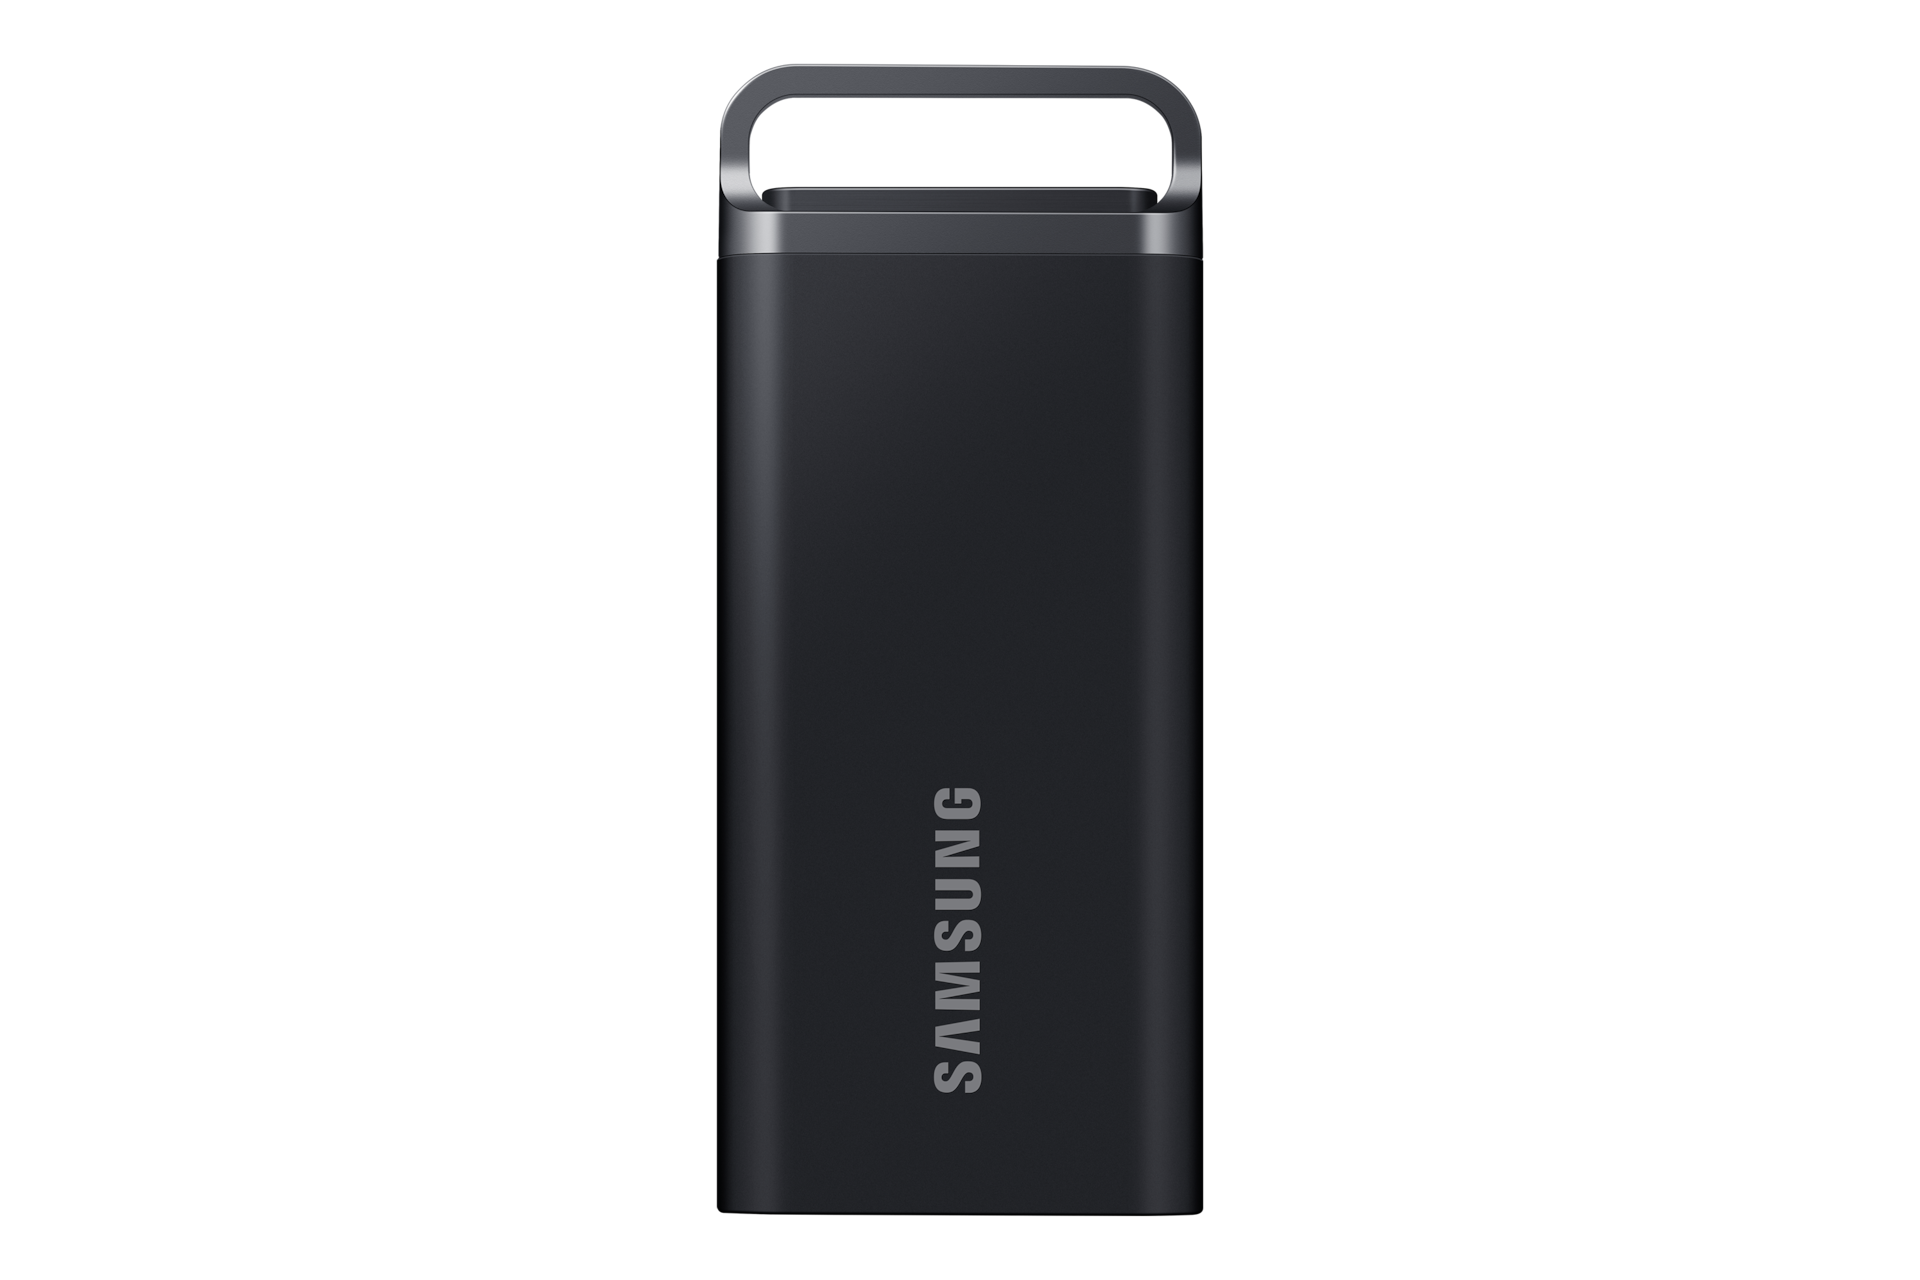 Global Business - Disque dur externe SSD Samsung T5 500Gb